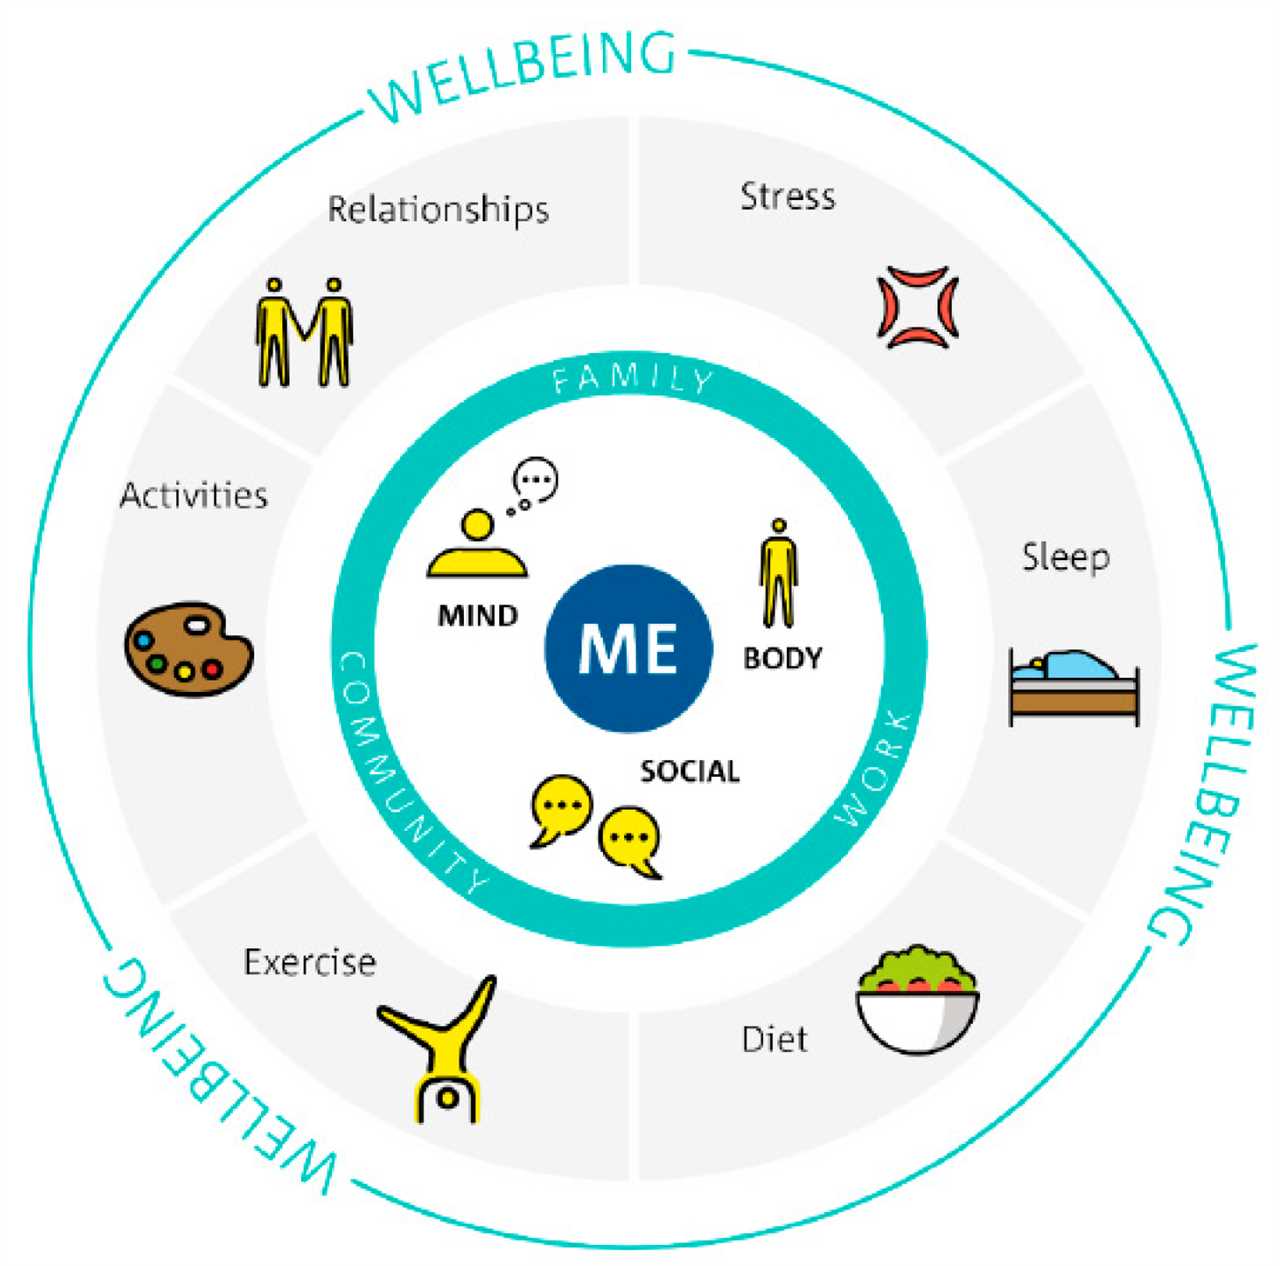 The Wellbeing Workout How to Manage Stress and Develop Resilience